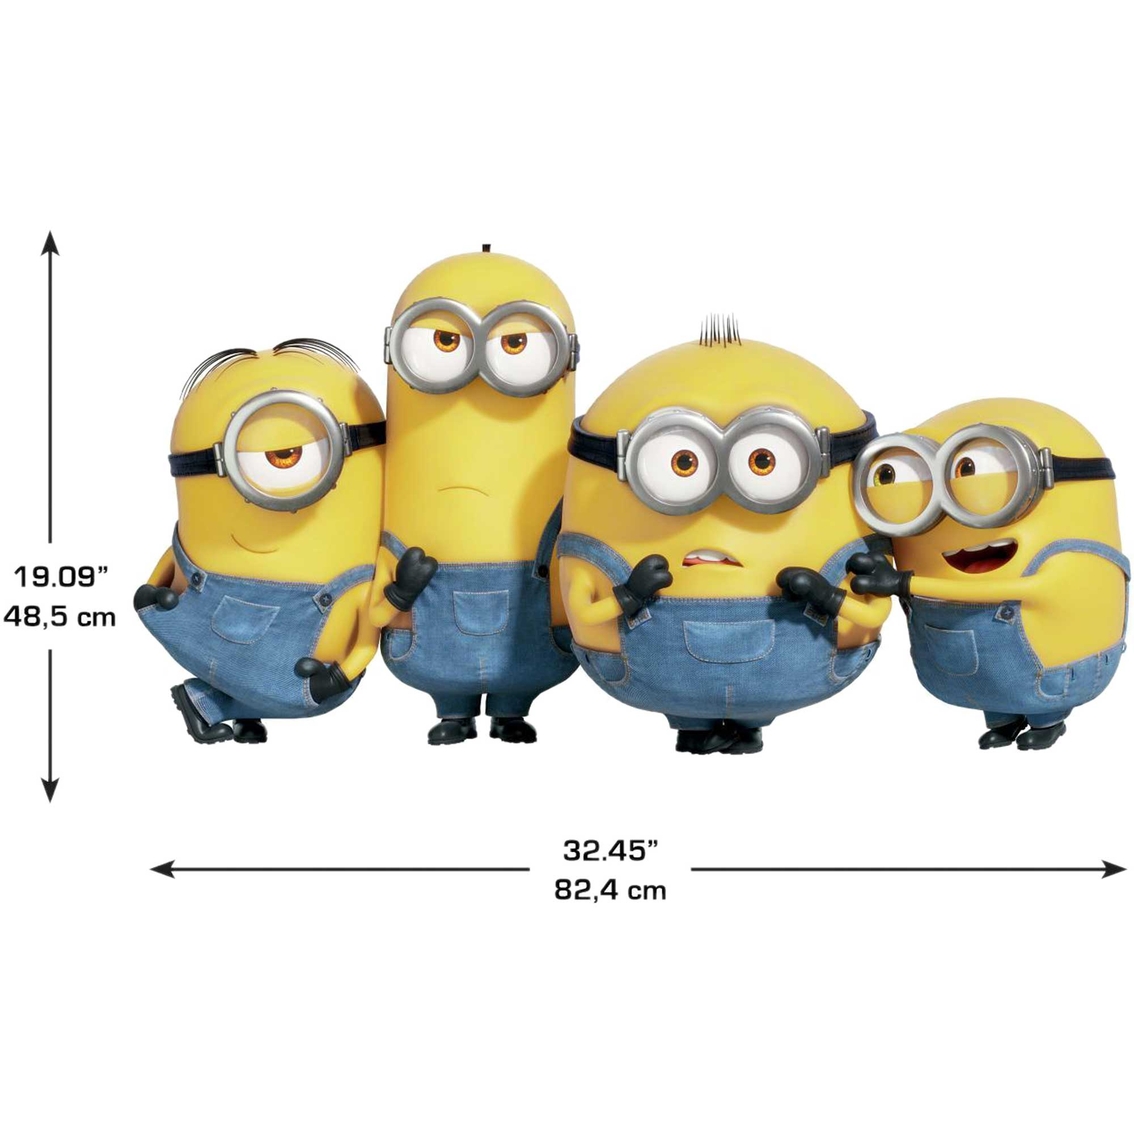 RoomMates Minions 2 Peel & Stick Giant Wall Decals - Image 4 of 7